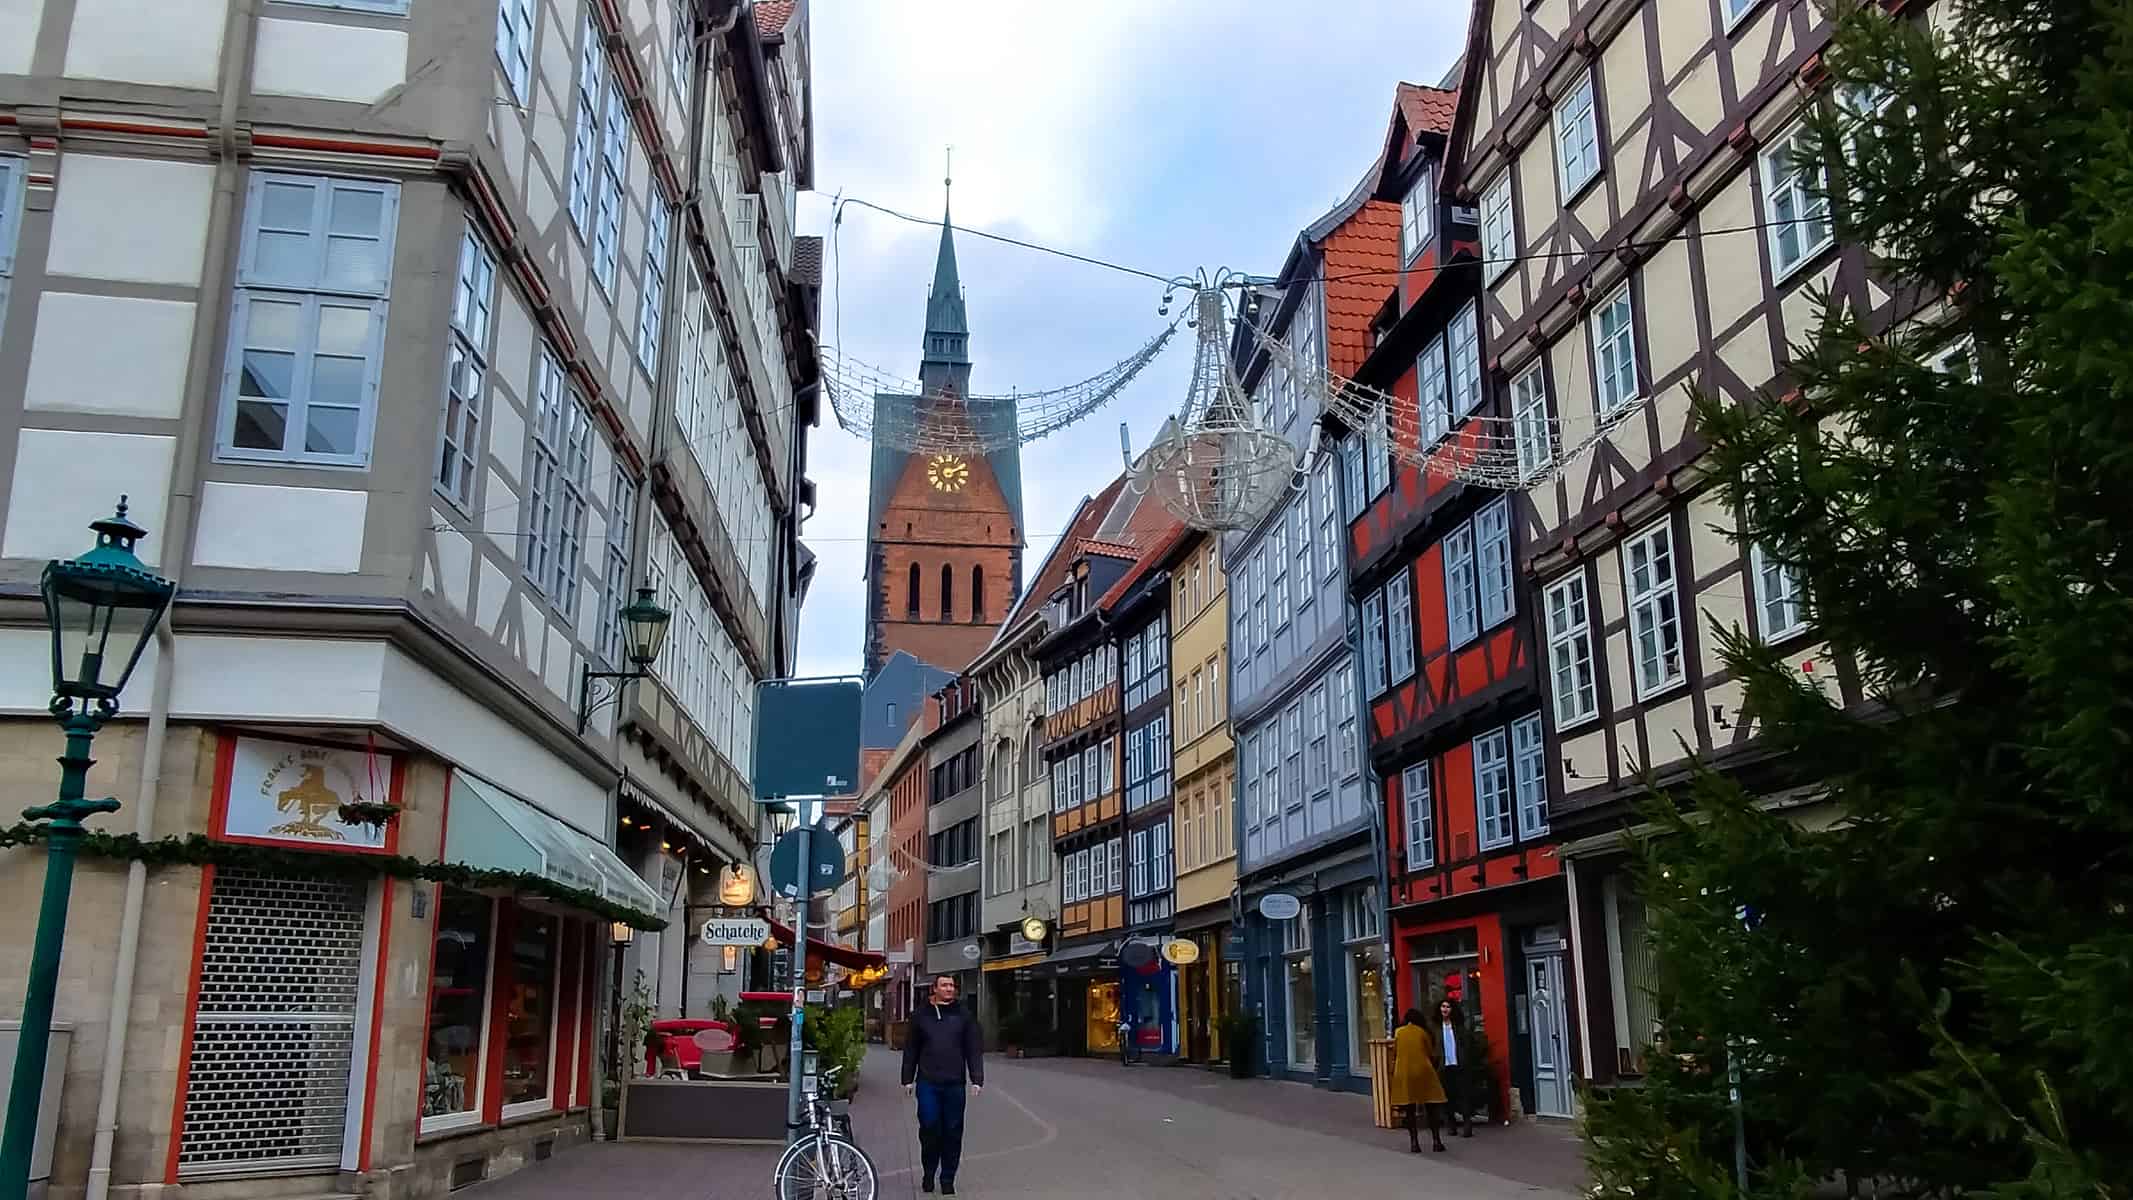 What started as a mission to spend Christmastime in Northern Germany became a week-long magical jaunt through Germany, Denmark and Sweden.